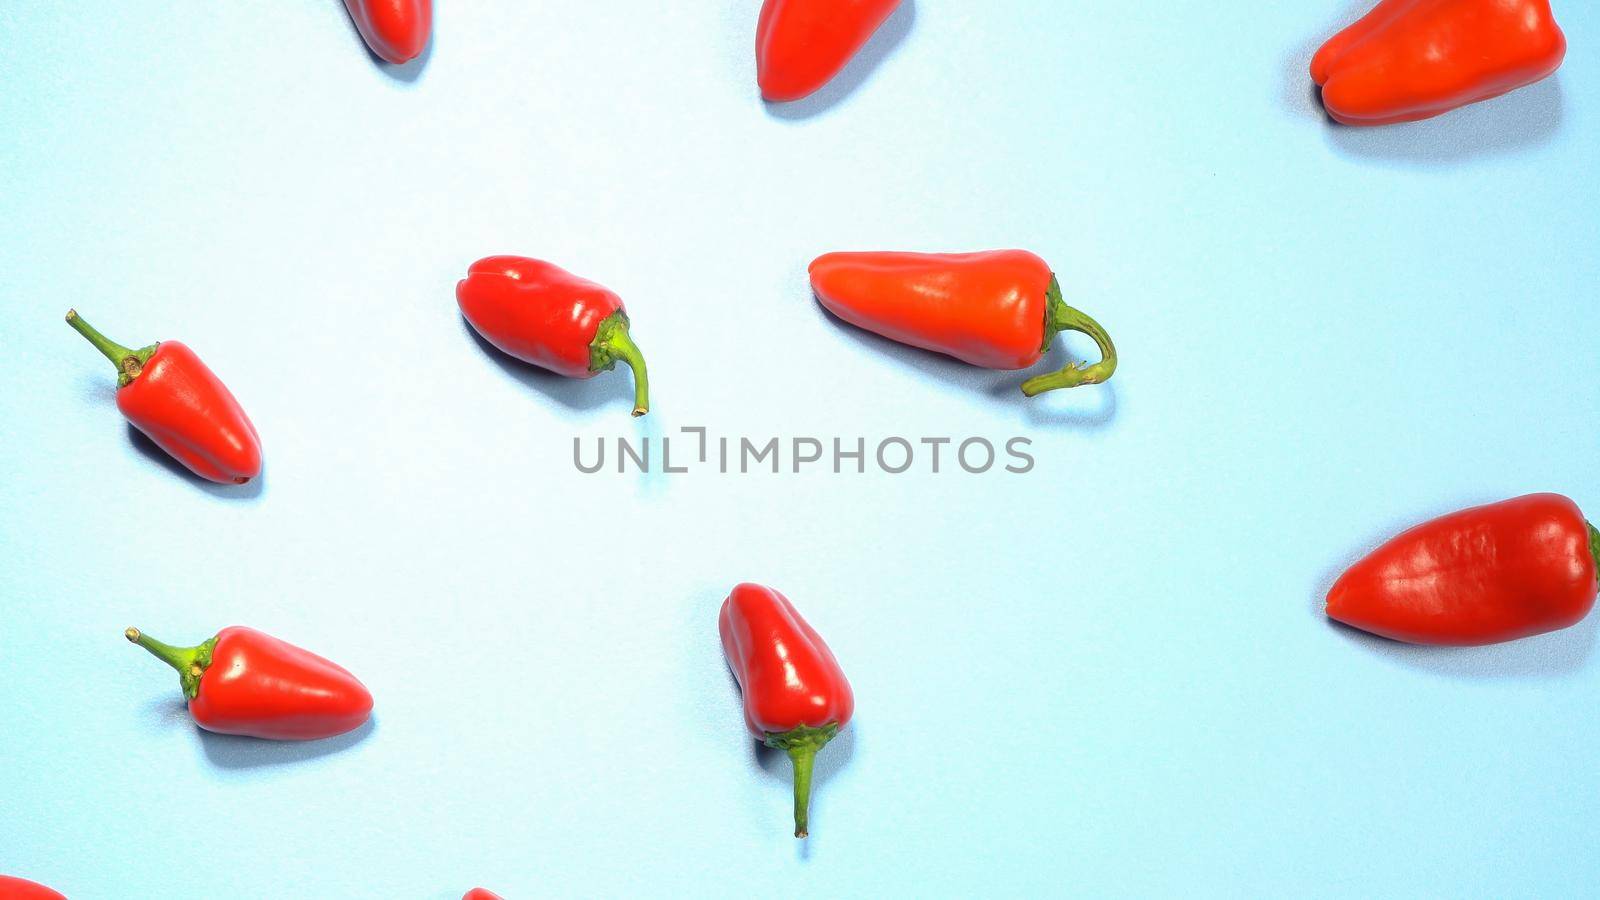 Mini red bell peppers beautifully laid out and ready to eat isolated on sky blue background. Top view.